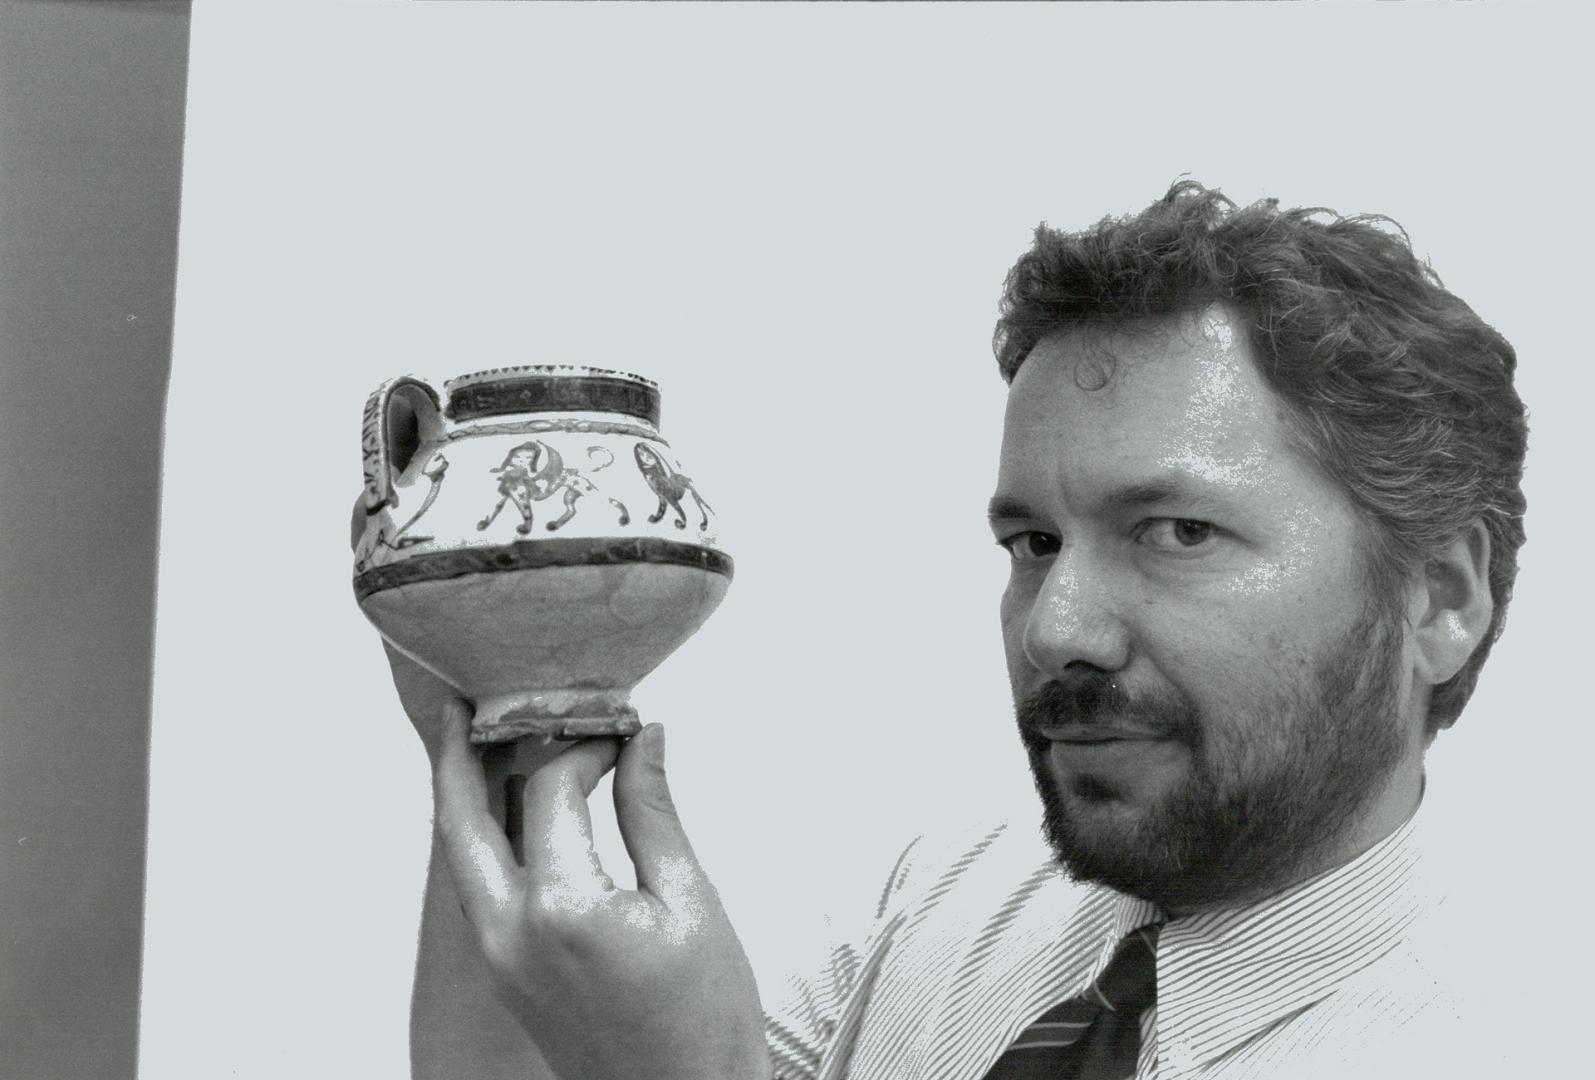 Robert Mason 12th-century pot fered at a kila in what is now Iran